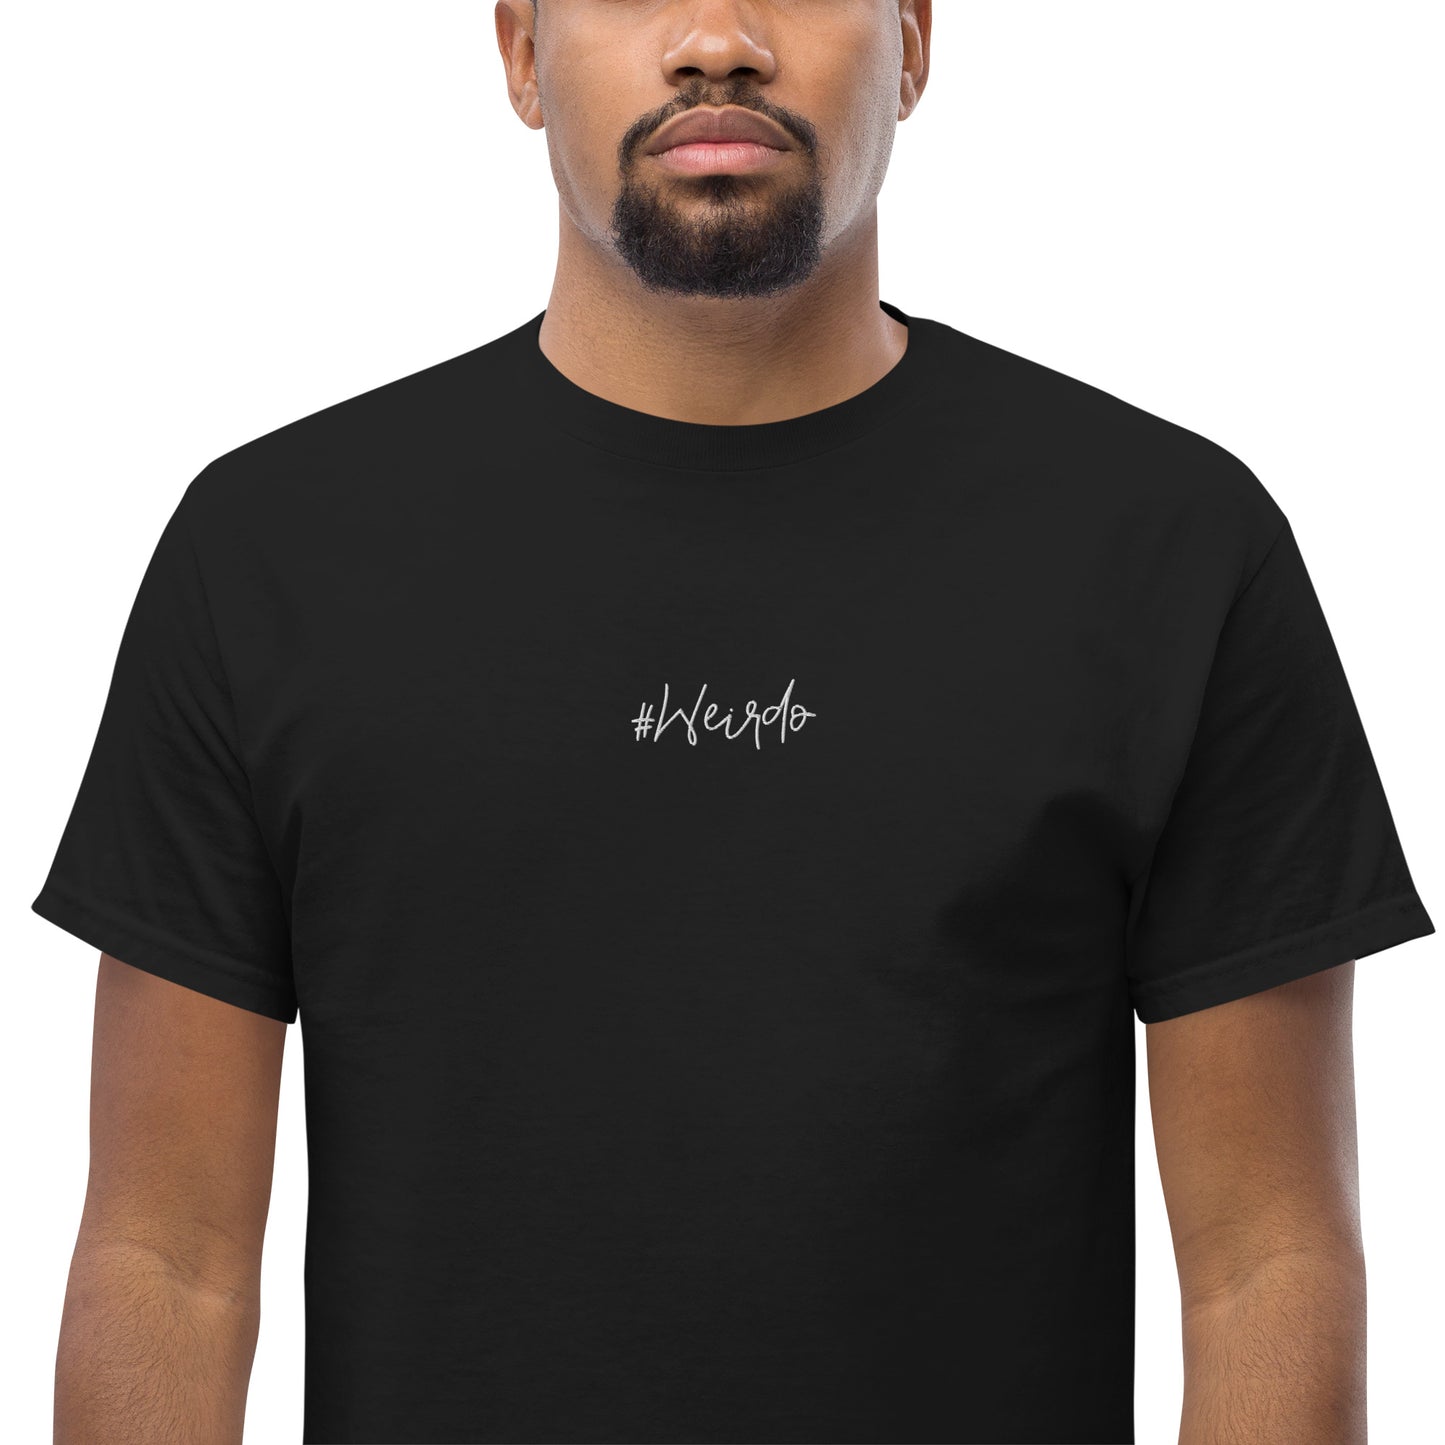 #WEIRDO | @ hashtagweirdo.com we sell all kinds of stuff for weirdos. This Black tee is from our Basic Line. But theres many more in our online shop!